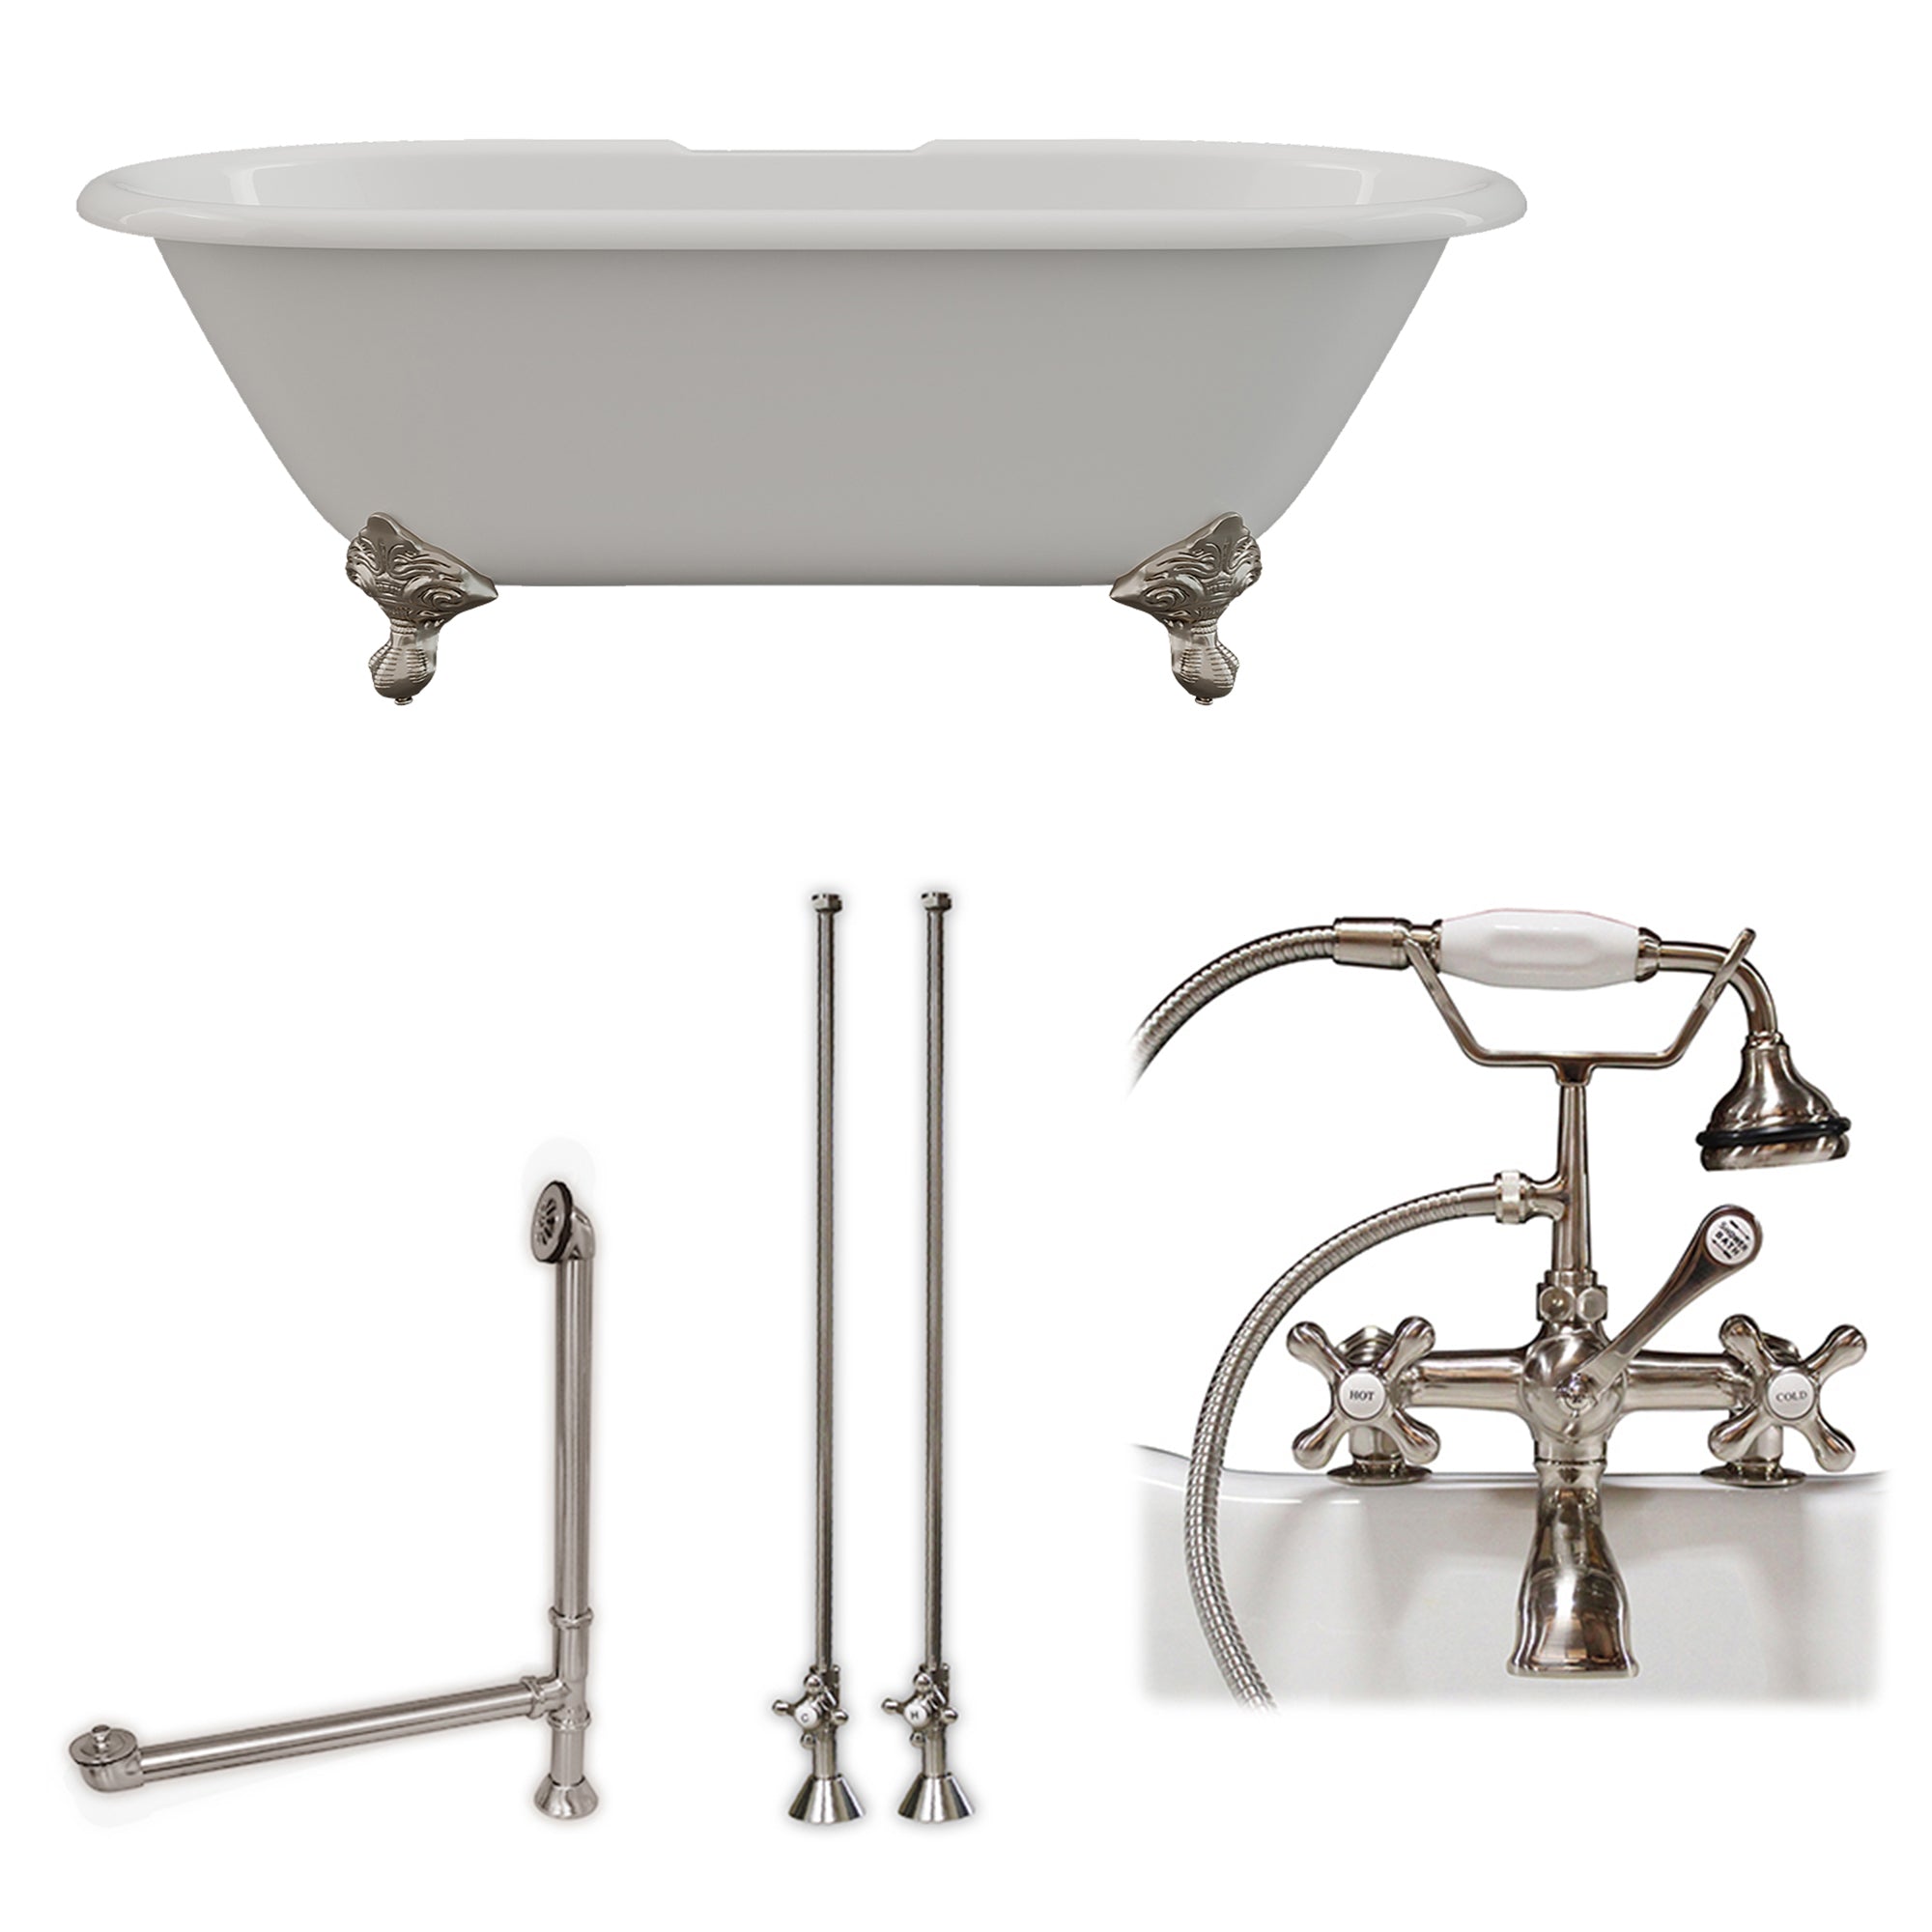 Cambridge Plumbing 66-Inch Double Ended Cast Iron Soaking Clawfoot Tub and Complete Deck Mount Plumbing Package DE67-463D-2-PKG-7DH - Vital Hydrotherapy